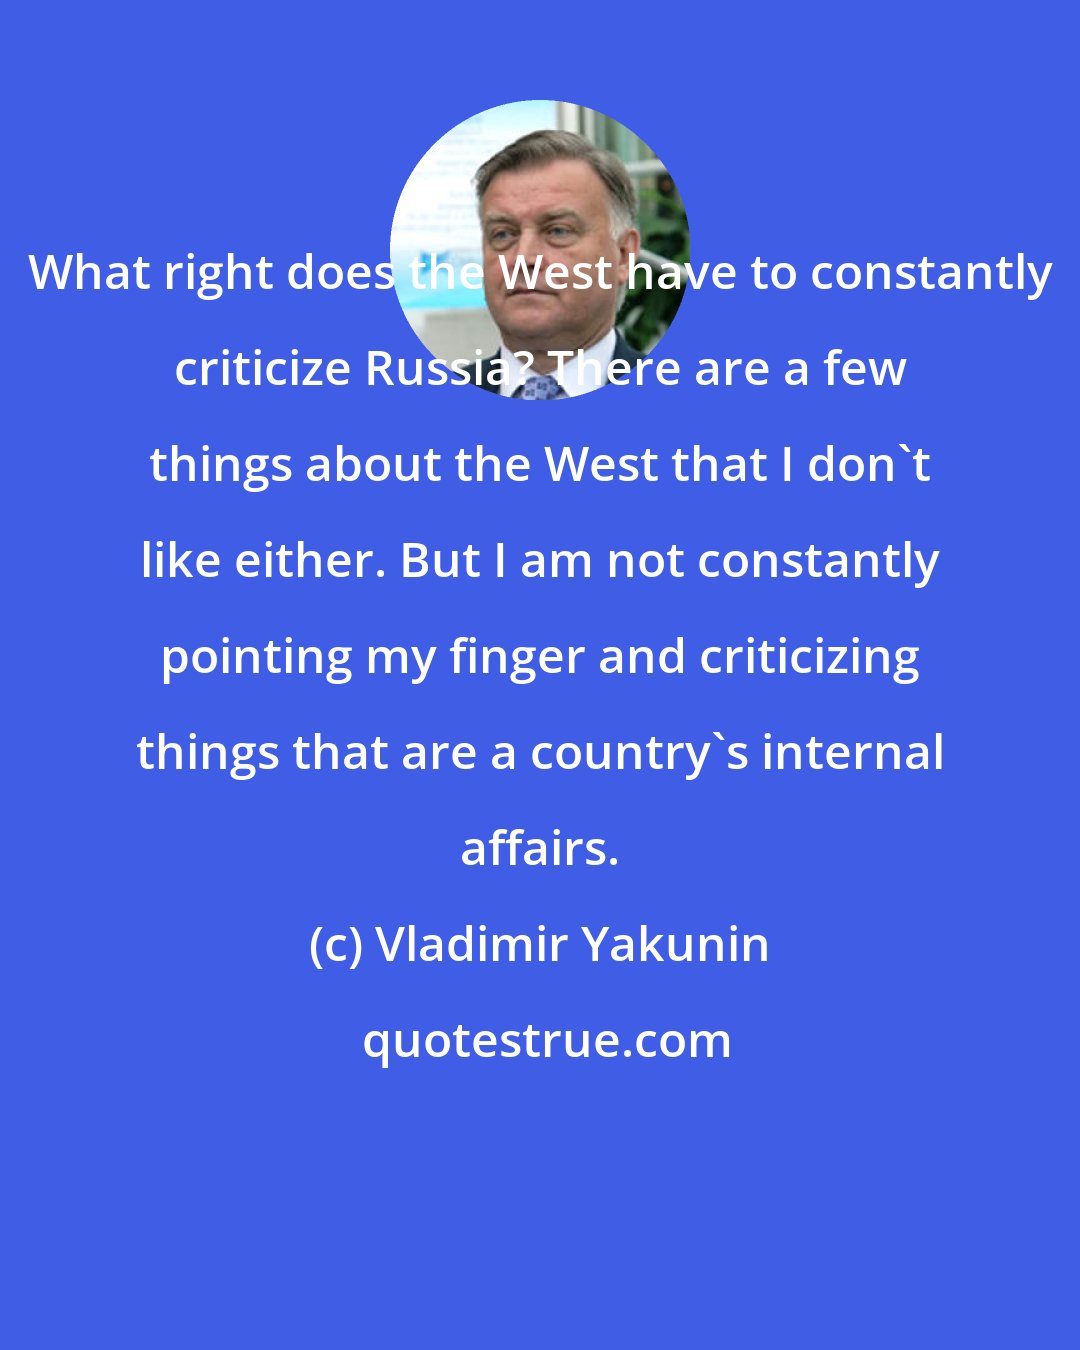 Vladimir Yakunin: What right does the West have to constantly criticize Russia? There are a few things about the West that I don't like either. But I am not constantly pointing my finger and criticizing things that are a country's internal affairs.